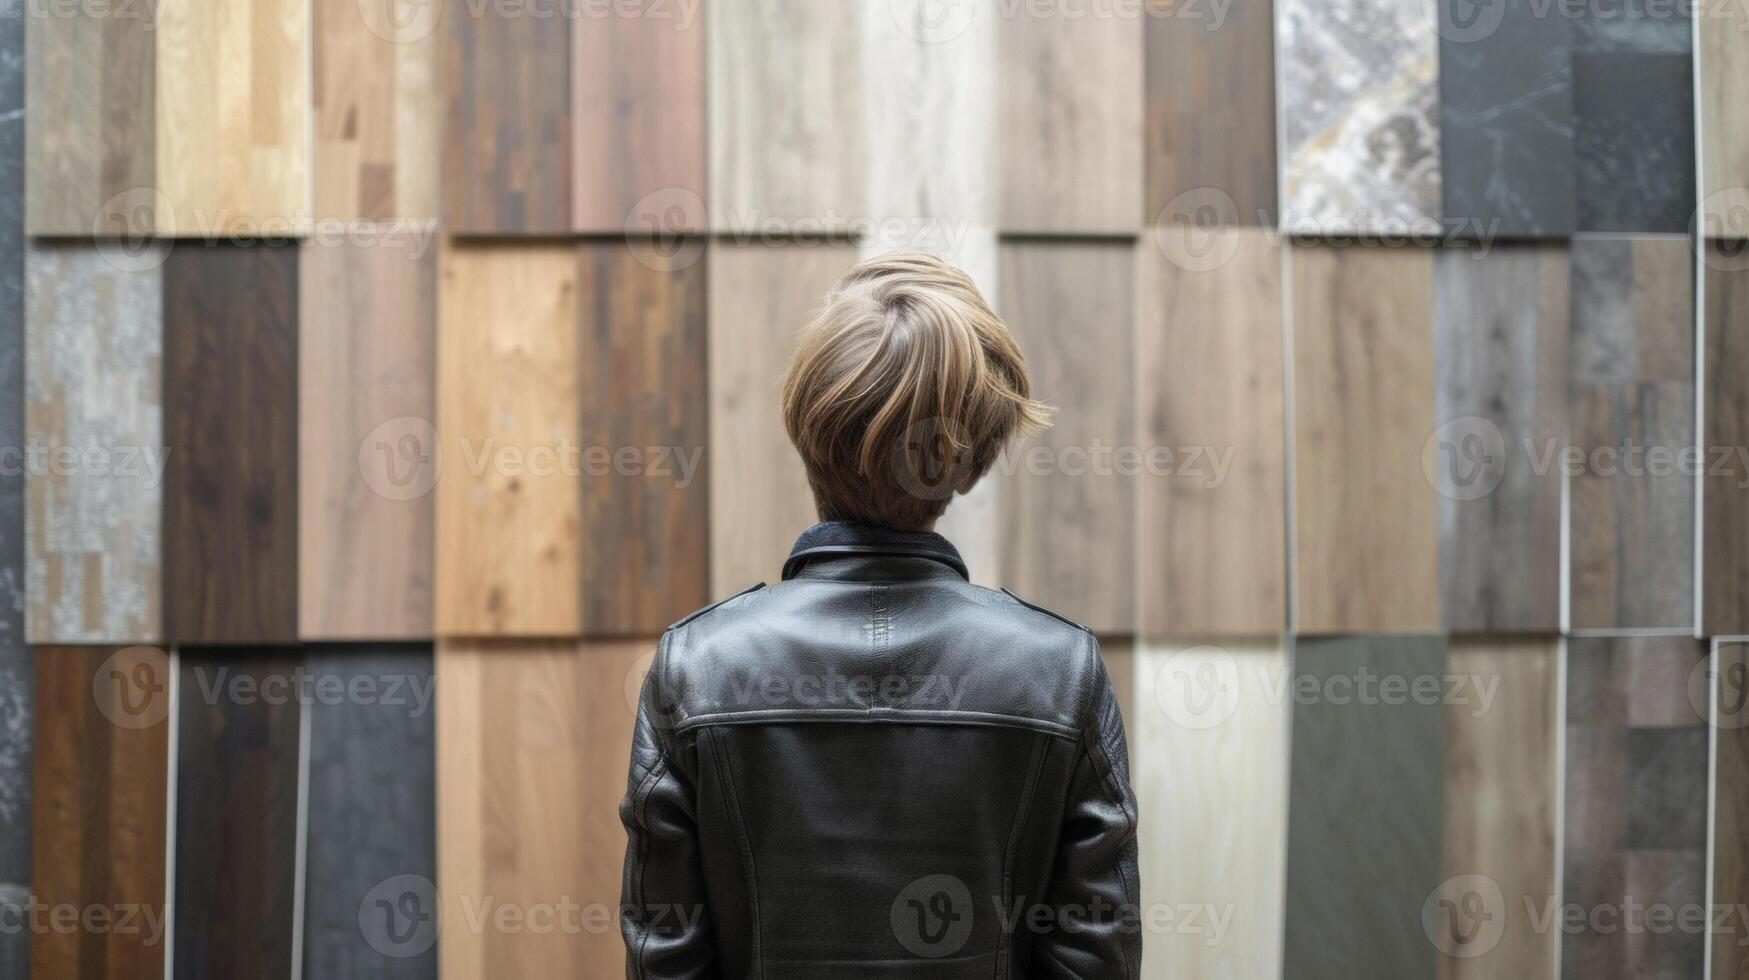 A person standing in front of a wall of different flooring materials trying to decide between hardwood laminate or tiles for their new home renovation project photo